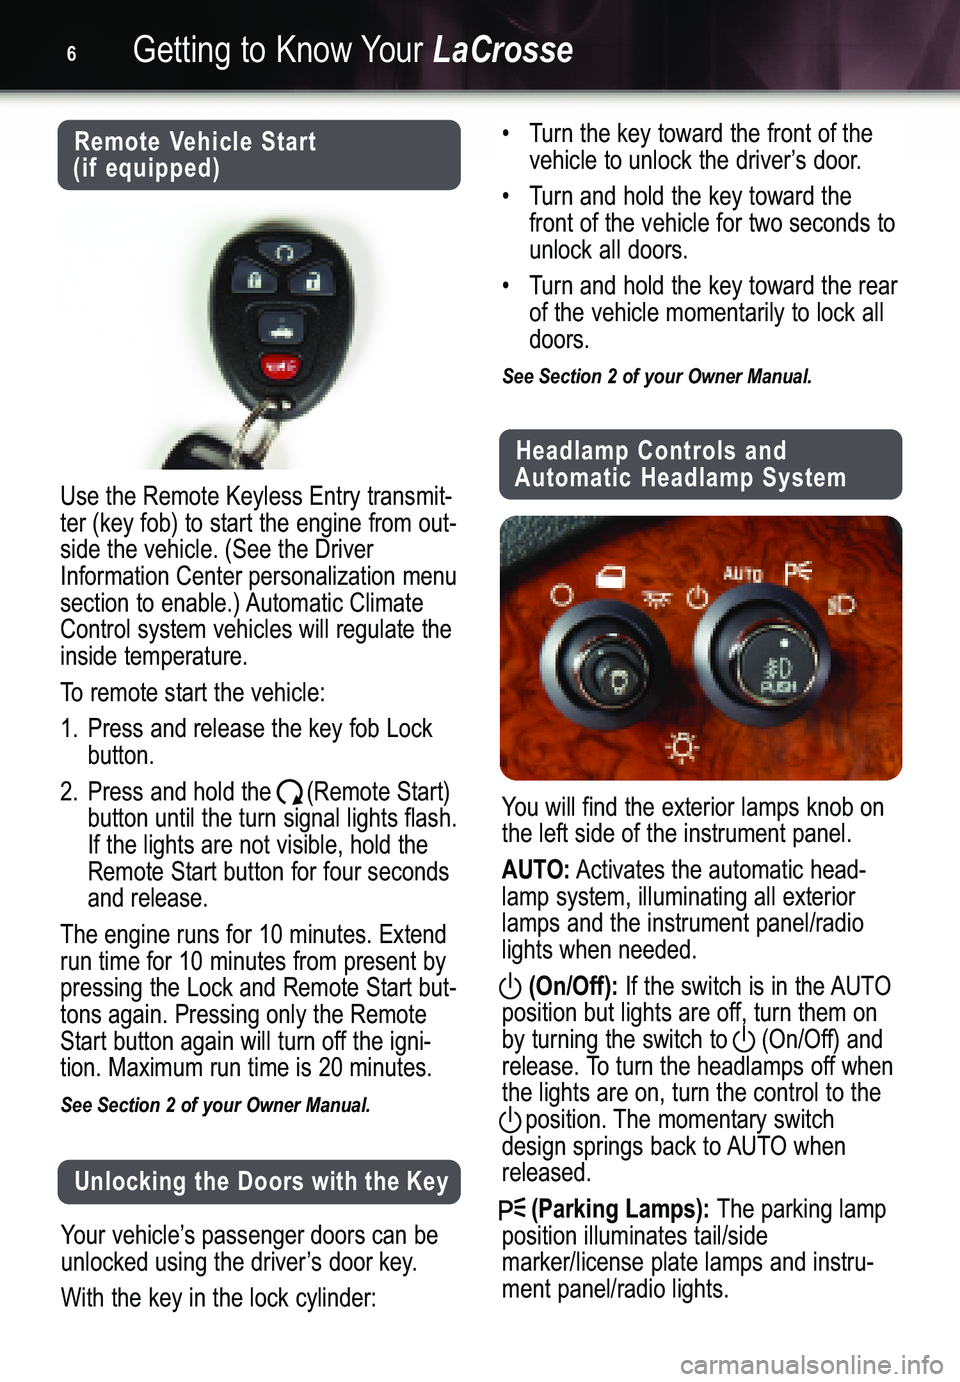 BUICK LACROSSE 2005  Get To Know Guide Getting to Know YourLaCrosse6
Remote Vehicle Start 
(if equipped)
Use the Remote Keyless Entry transmit�
ter (key fob) to start the engine from out�side the vehicle. (See the DriverInformation Center 